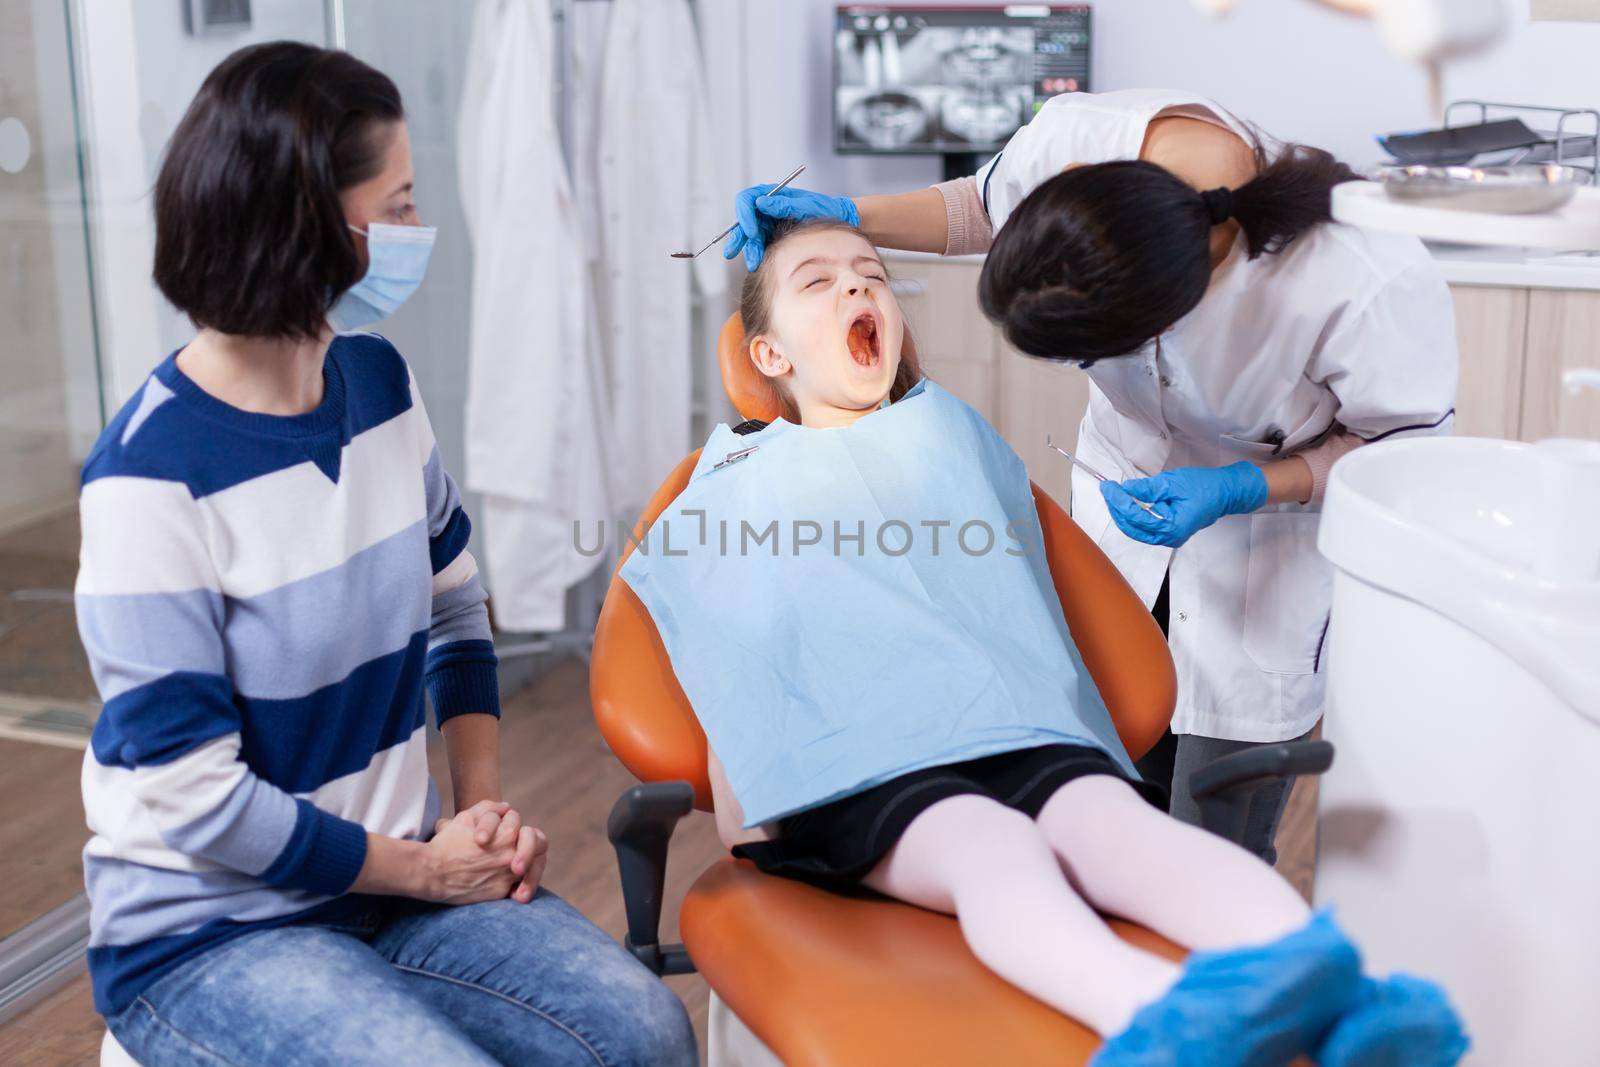 Little kid with mouth open wearing bib sittingon dental chair and dentist looking for caries Dentistry specialist during child cavity consultation in stomatology office using modern technology.